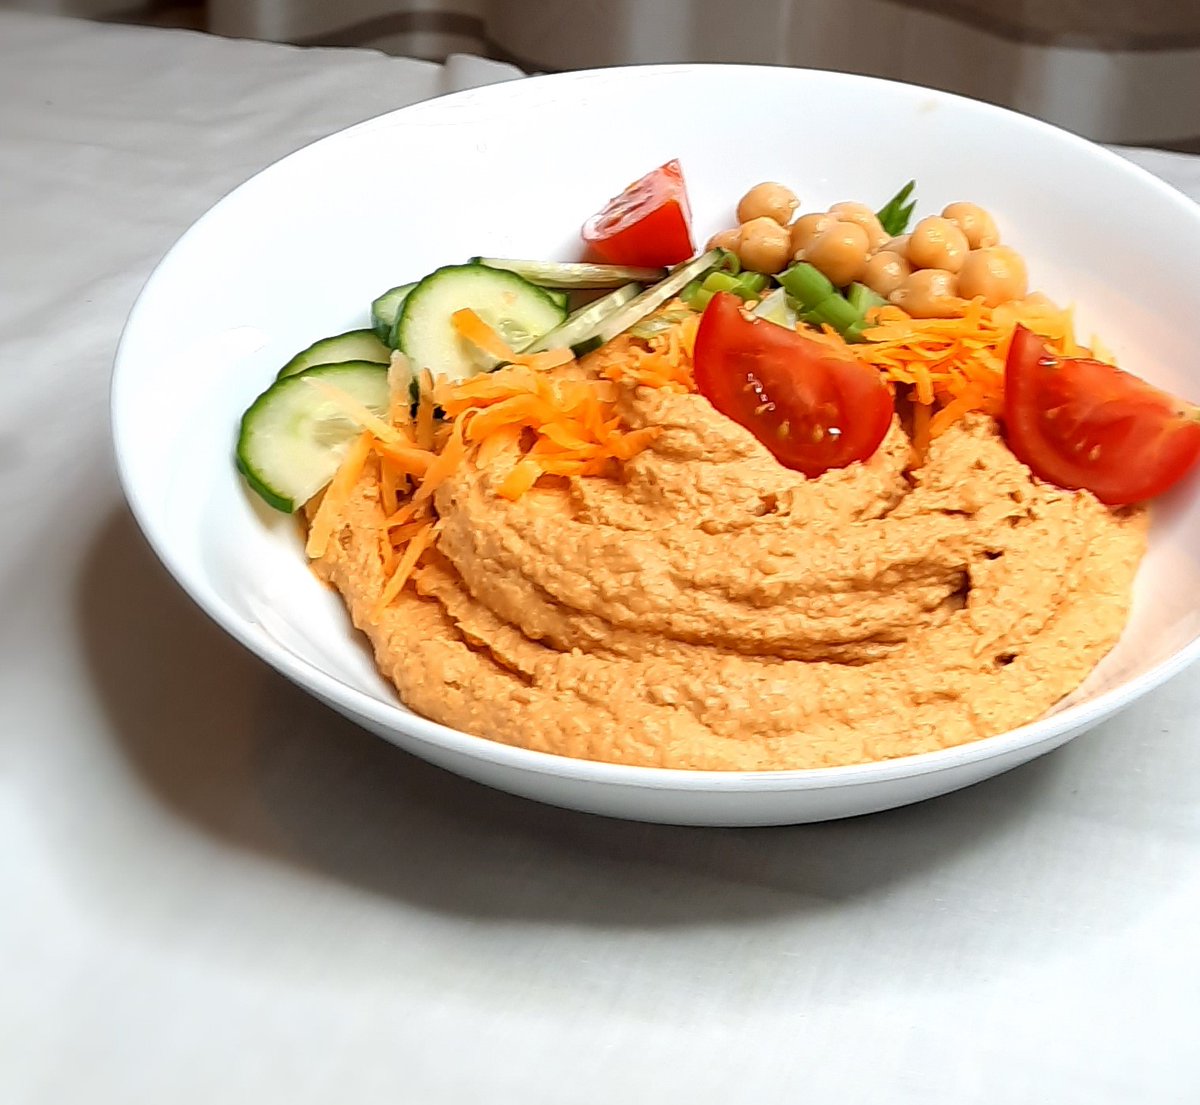 youtube.com/watch?v=nhw4-A…
Watch this video in full to see 5 different ways to make #delicious homemade HUMMUS

#lifestylewithsharon

#HealthyLiving
#foodlovers
#recipevideo
#YouTuber
#sharon